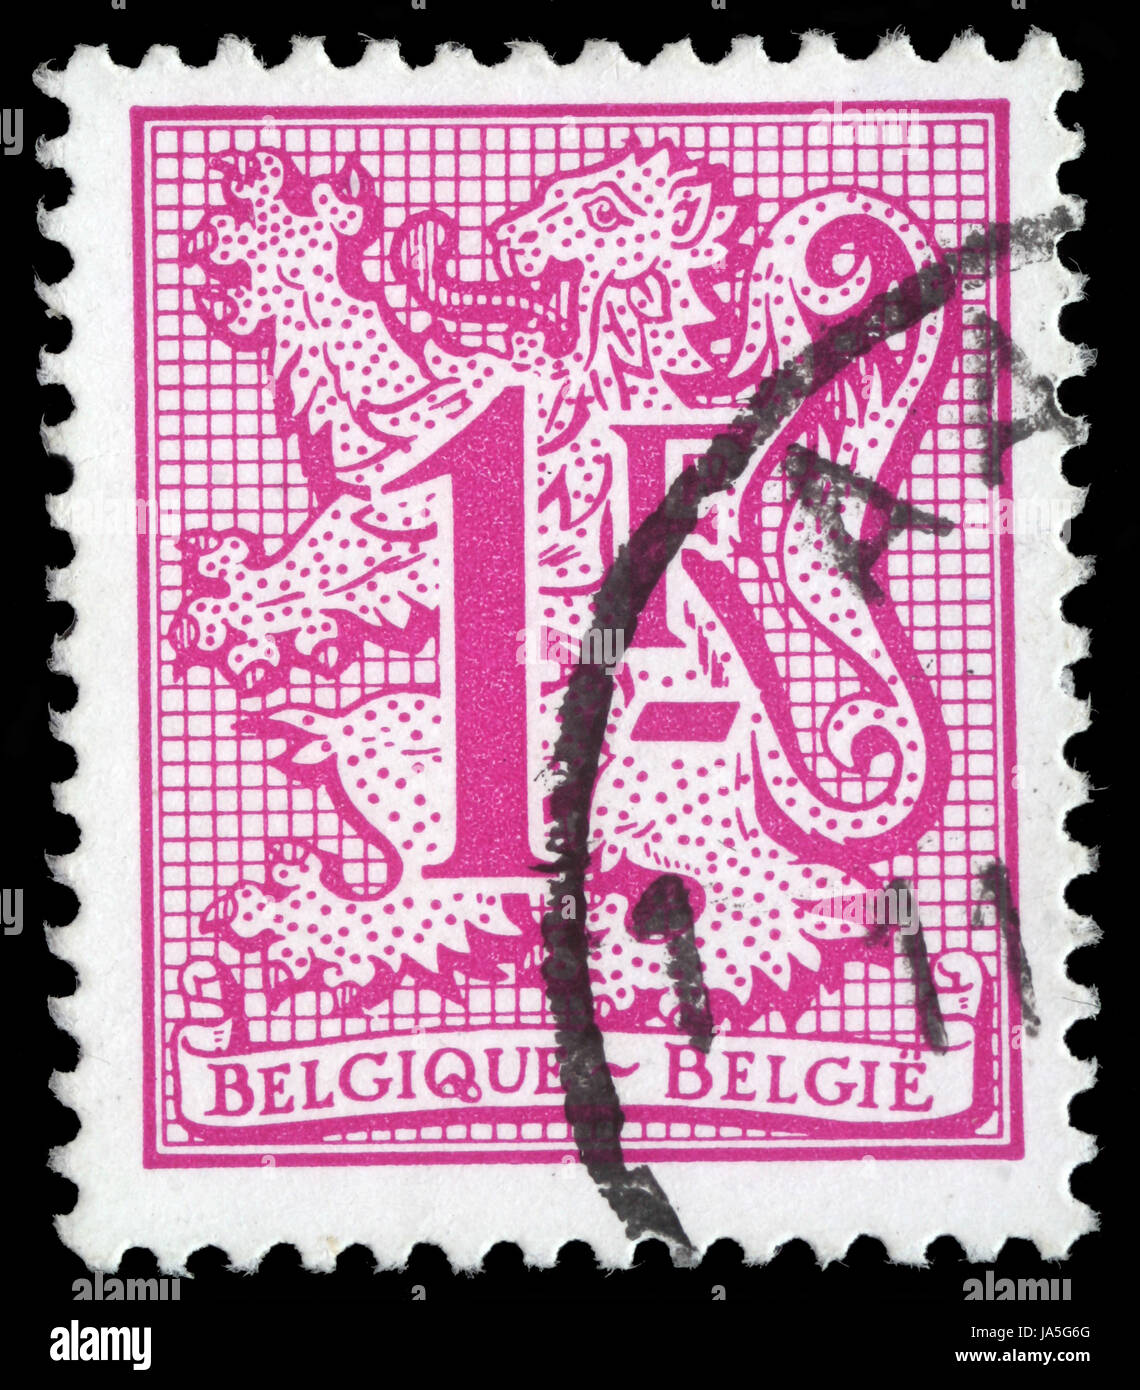 BELGIUM-CIRCA 1951:A stamp printed in BELGIUM shows image of The coat of arms of the Kingdom of Belgium bears a lion, called the Belgian Lion, or Leo Belgicus, circa 1951. Stock Photo